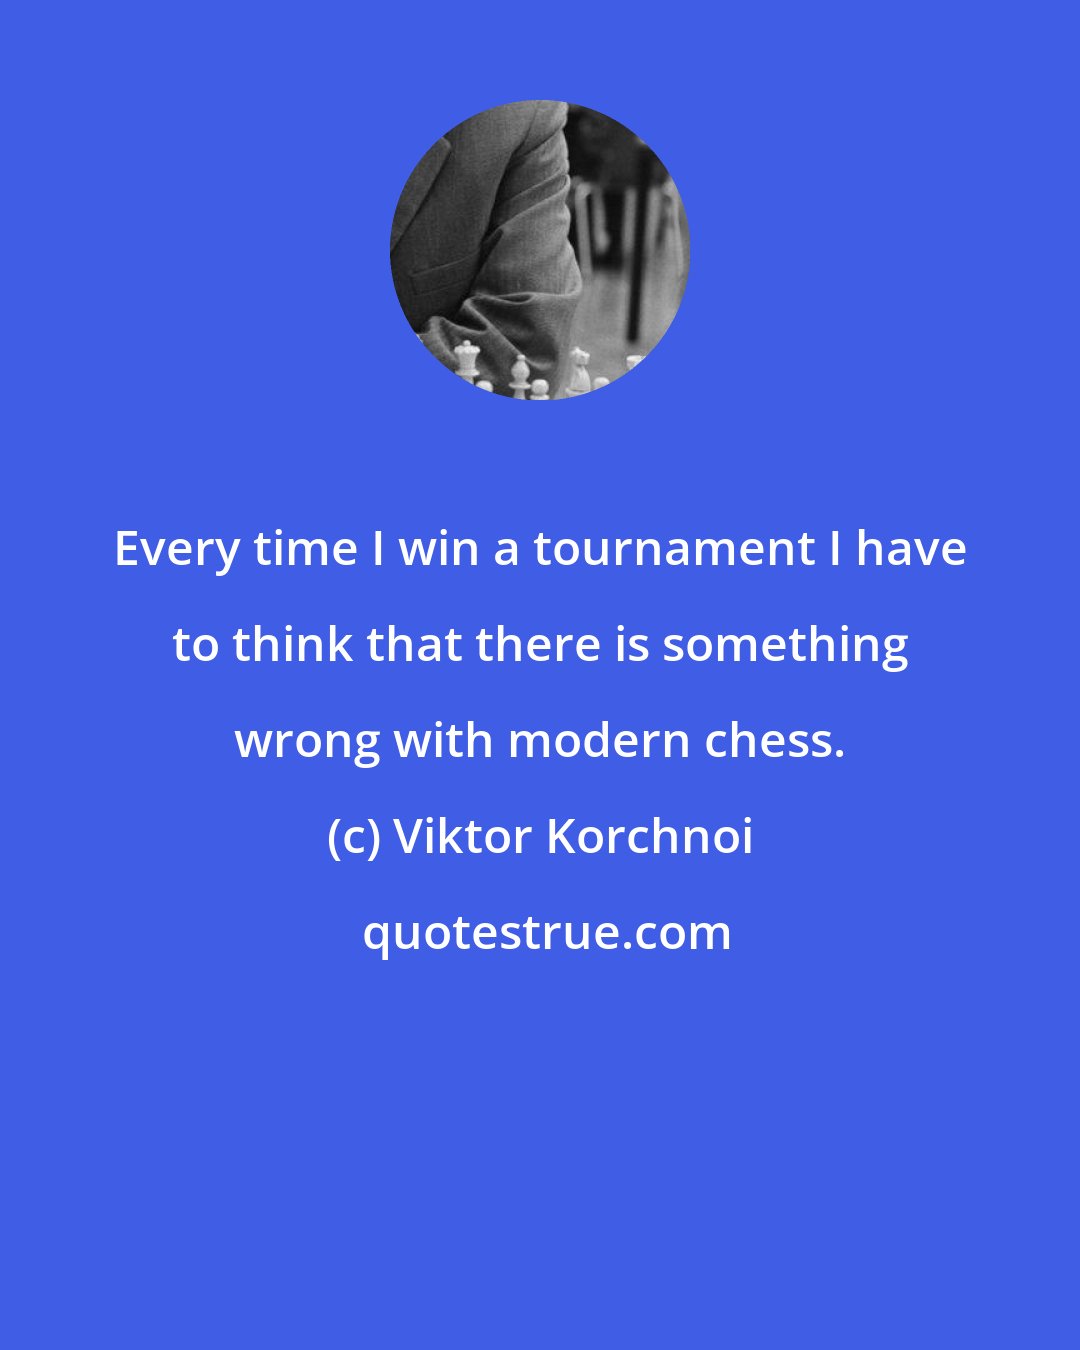 Viktor Korchnoi: Every time I win a tournament I have to think that there is something wrong with modern chess.